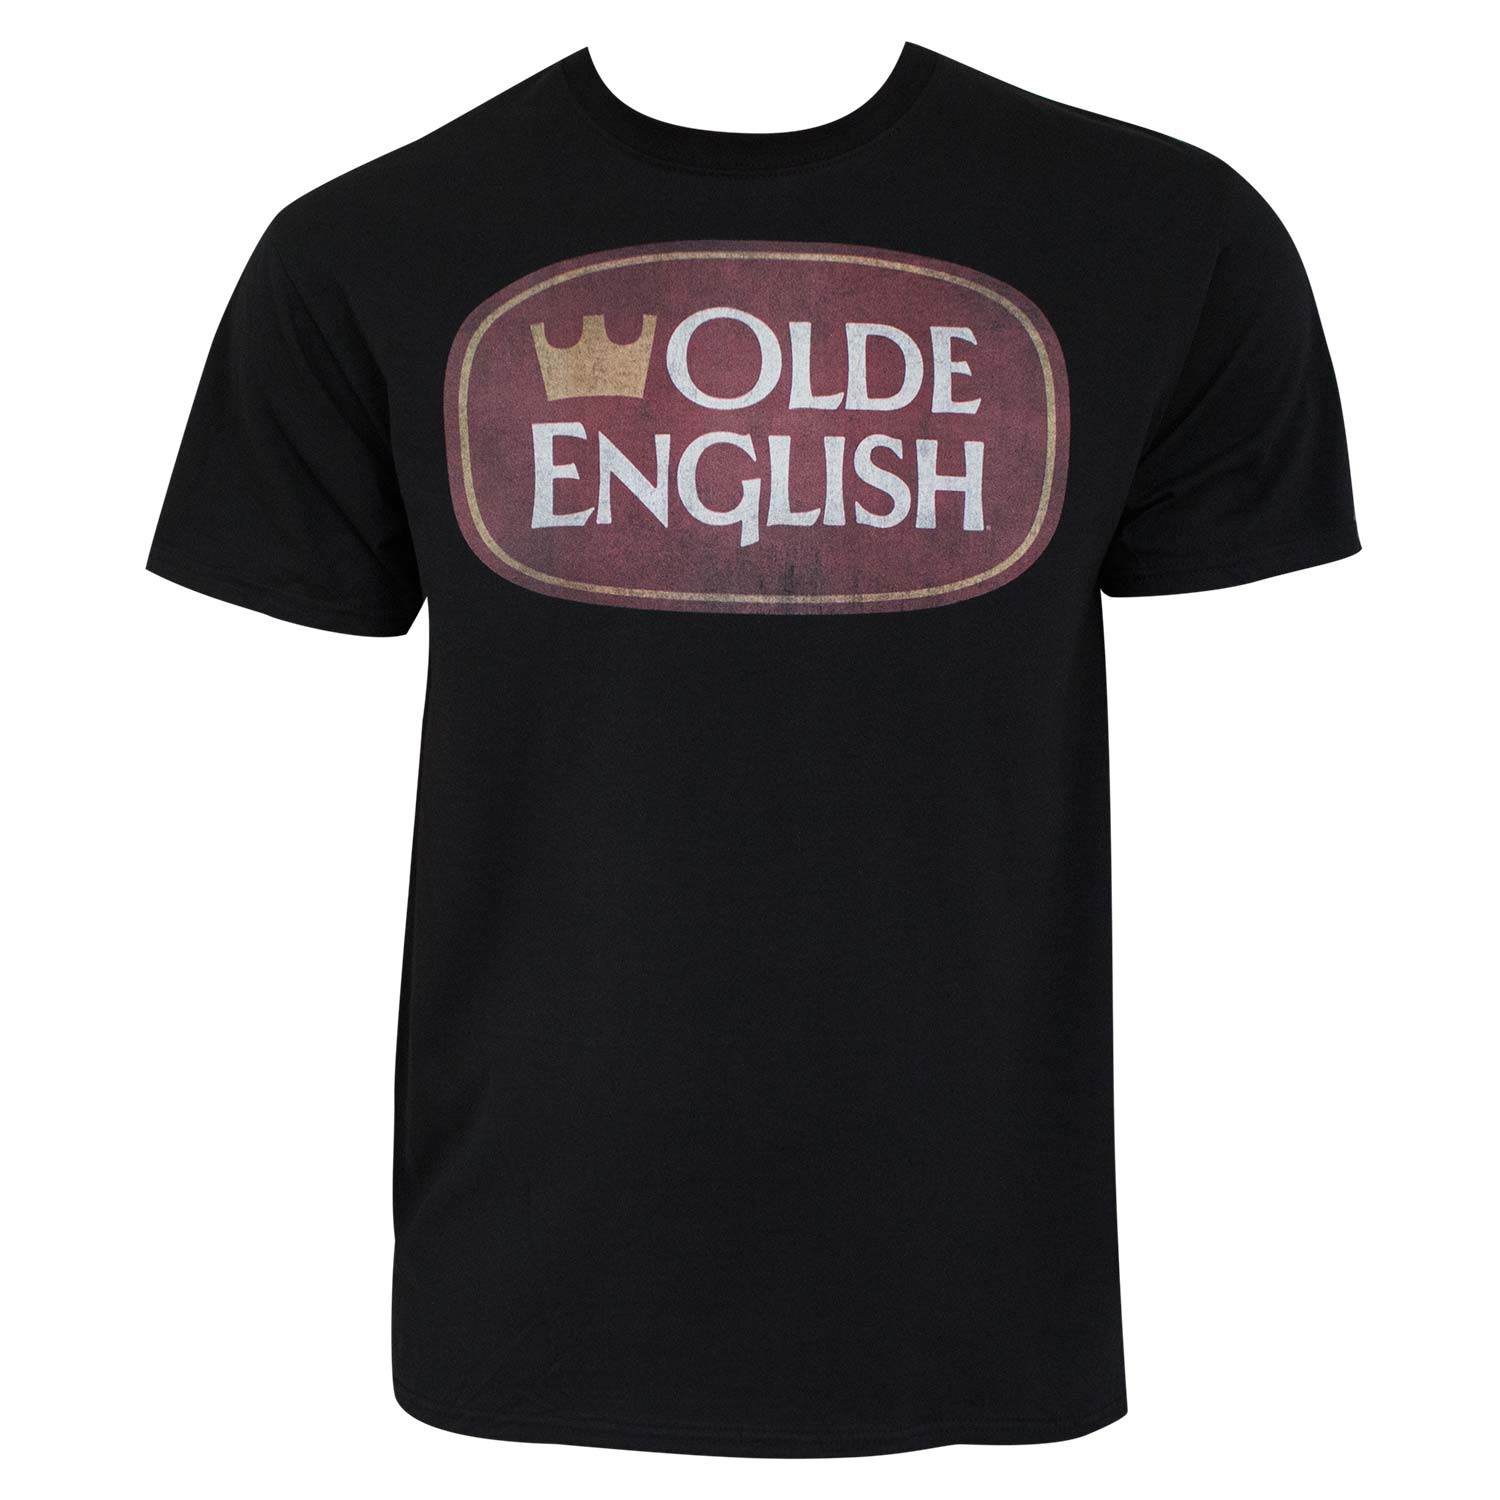 Best old english. Tees на английском. Olde English 800. Faded old Shirt. England Crown buy.